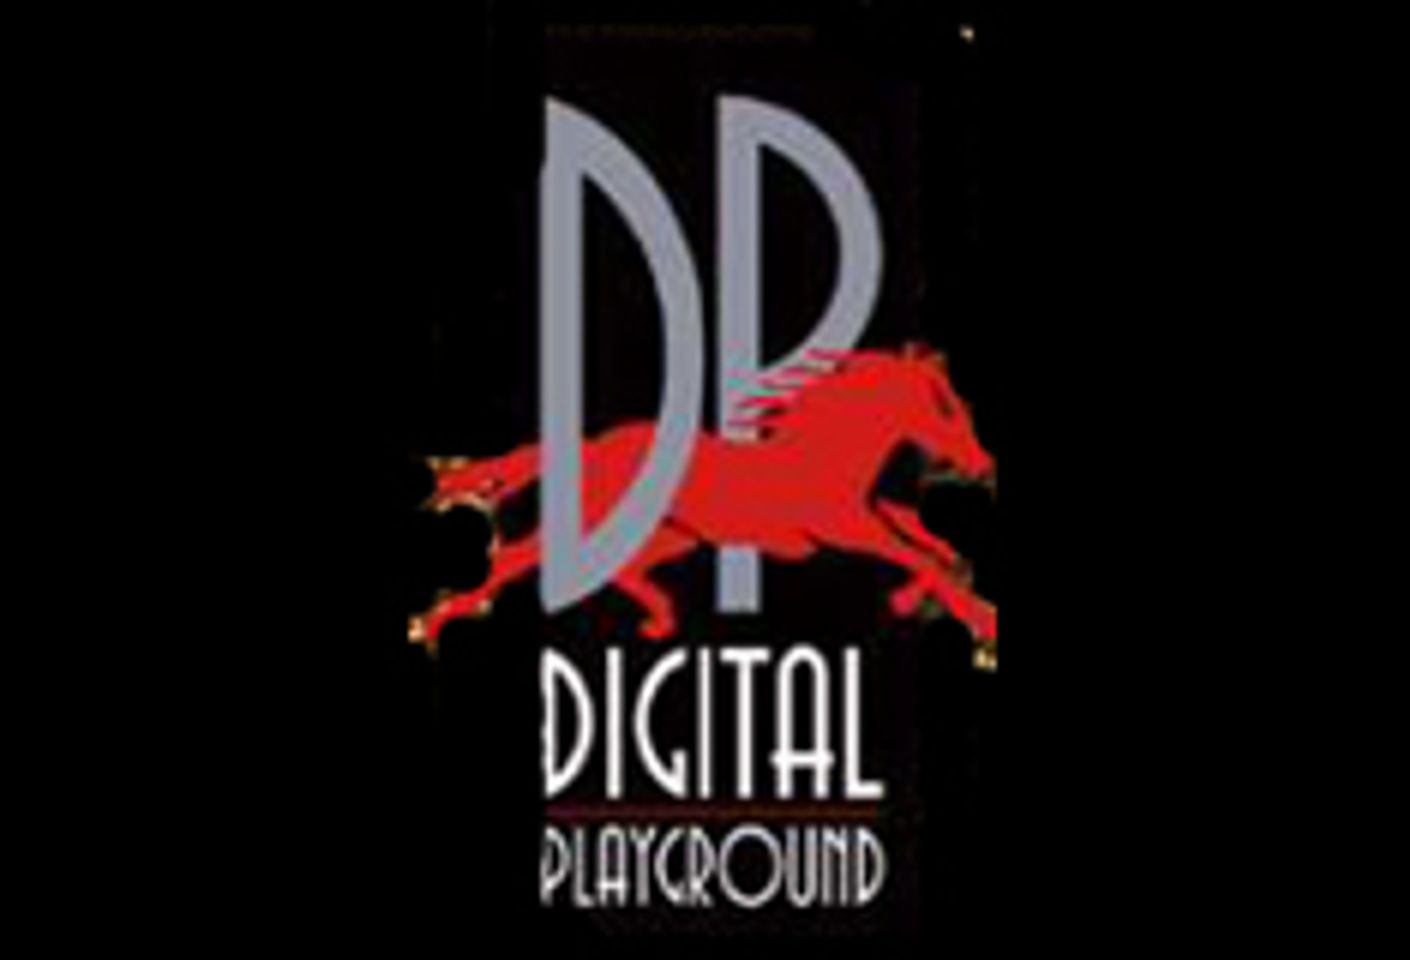 Digital Playground Featured Prominently in <i>New York Times</i>